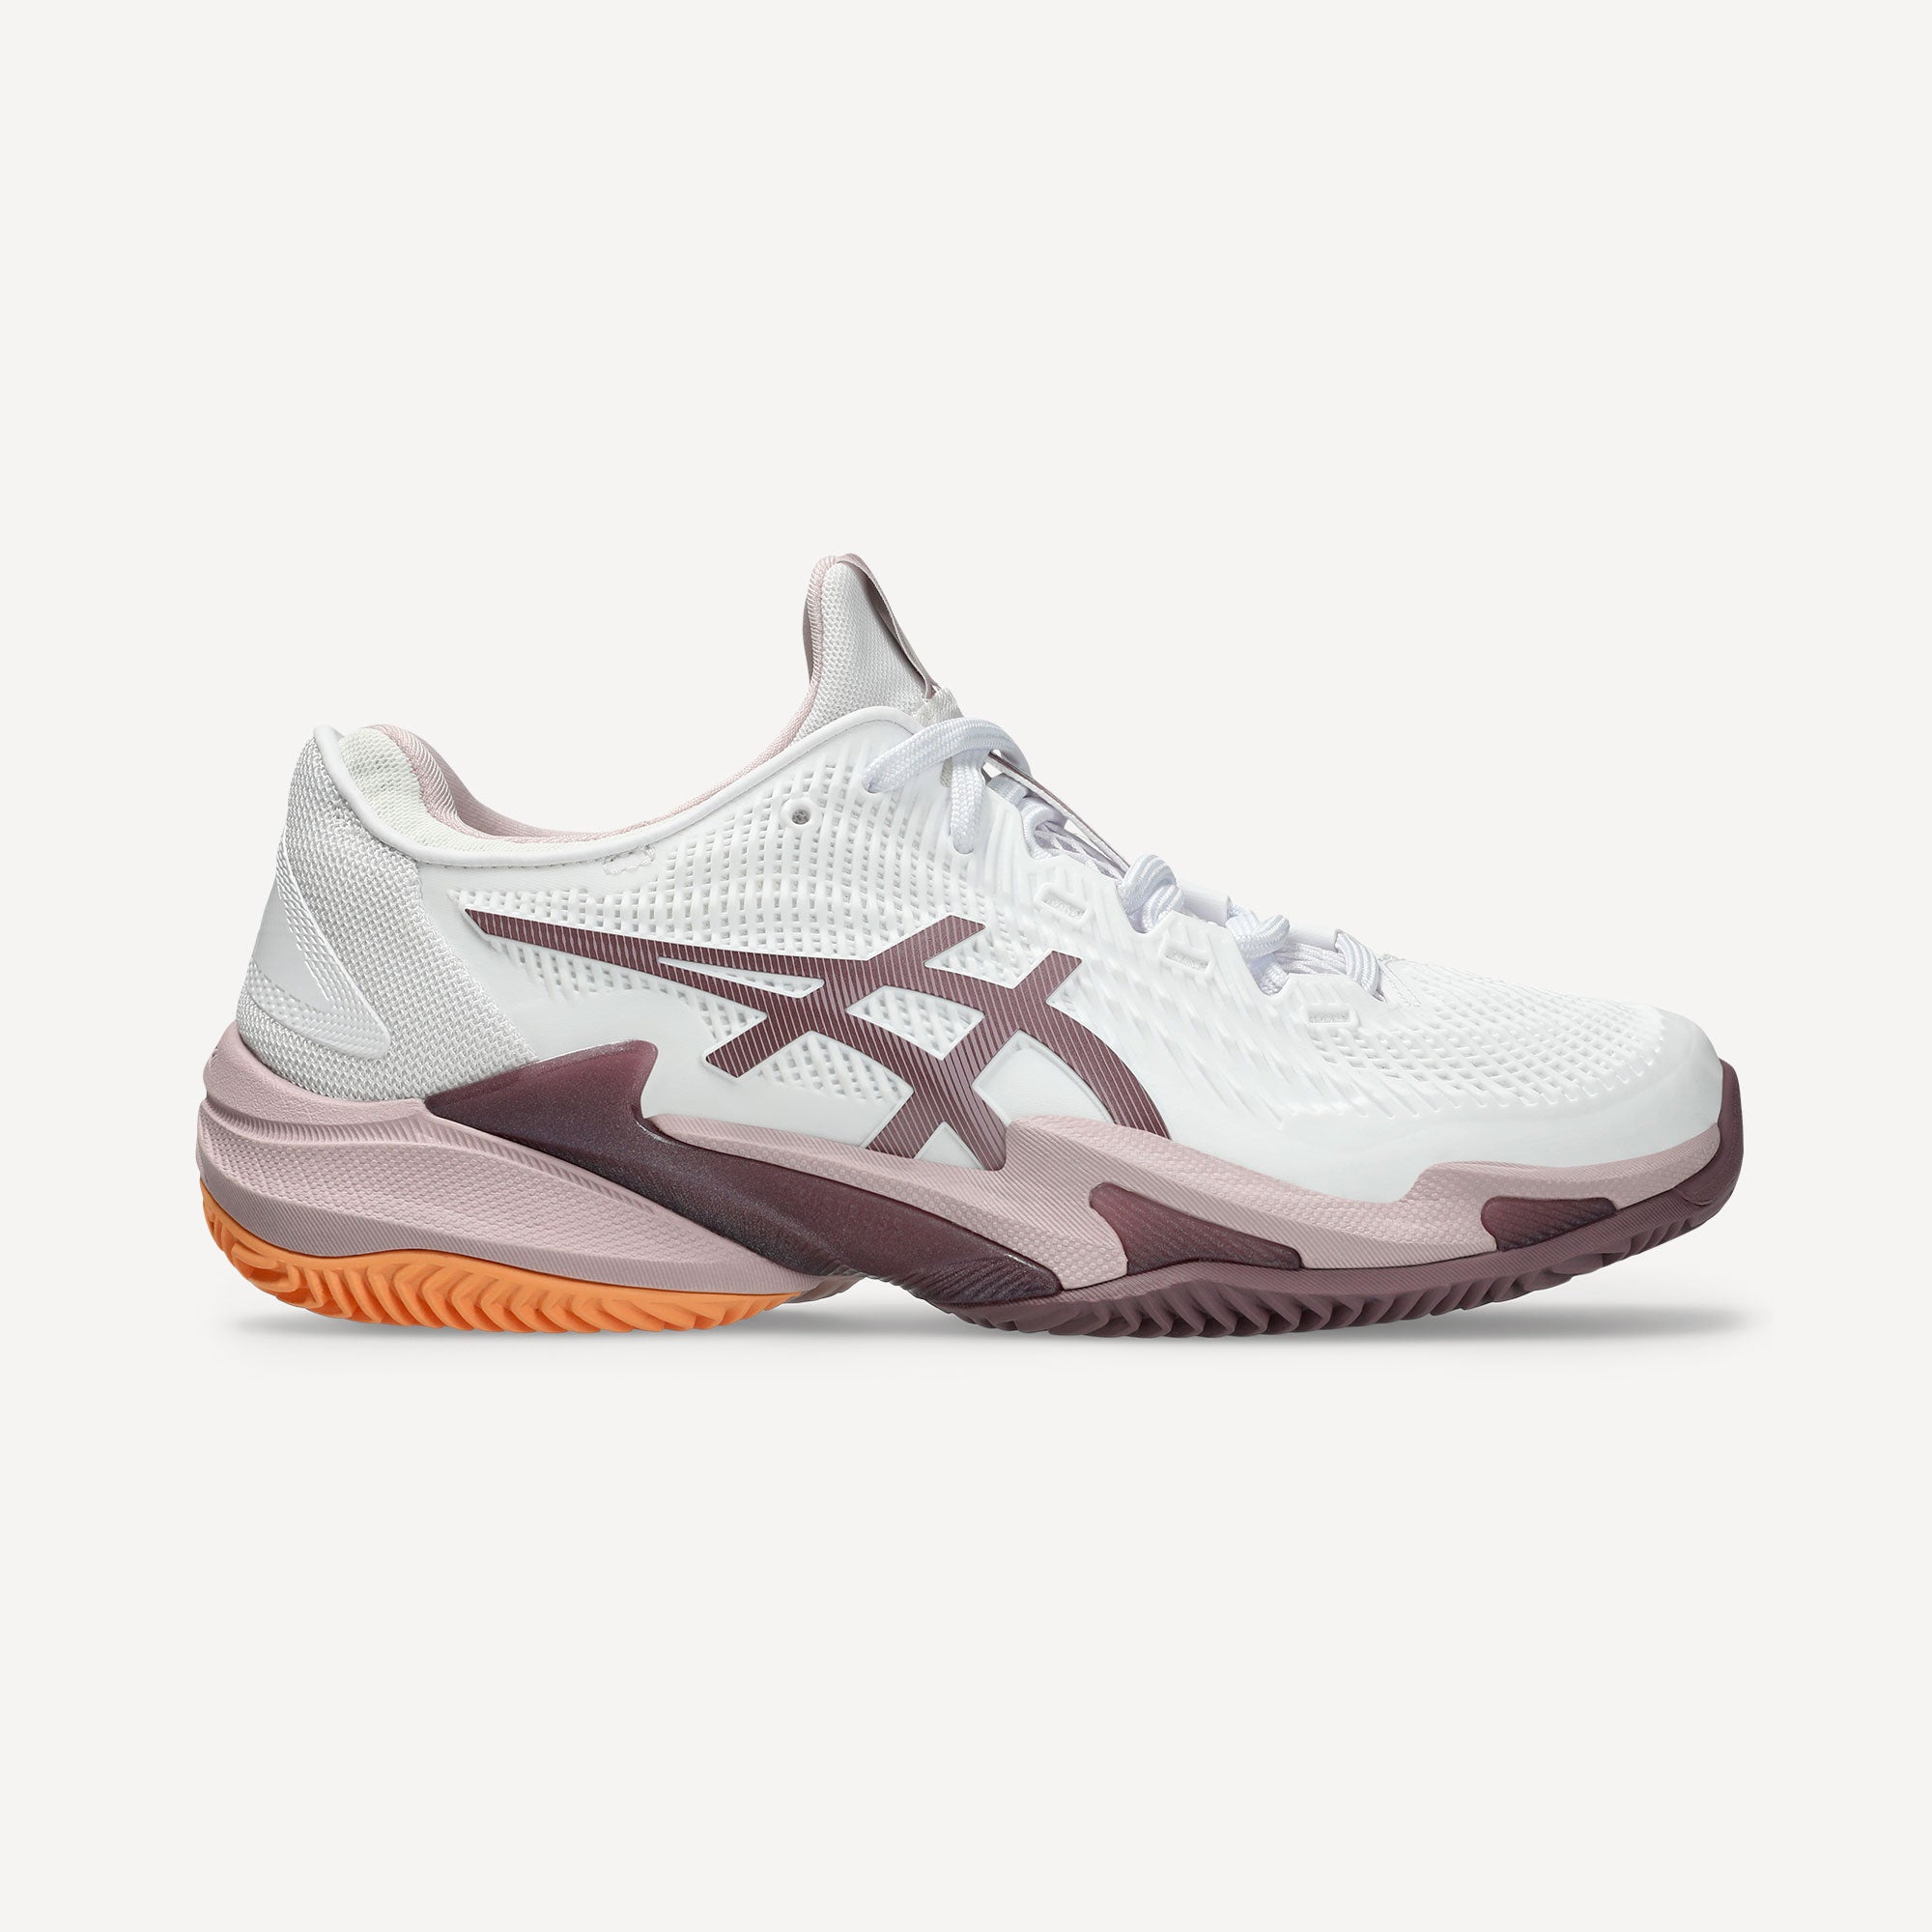 ASICS Court FF 3 Women's Clay Court Tennis Shoes - White (1)